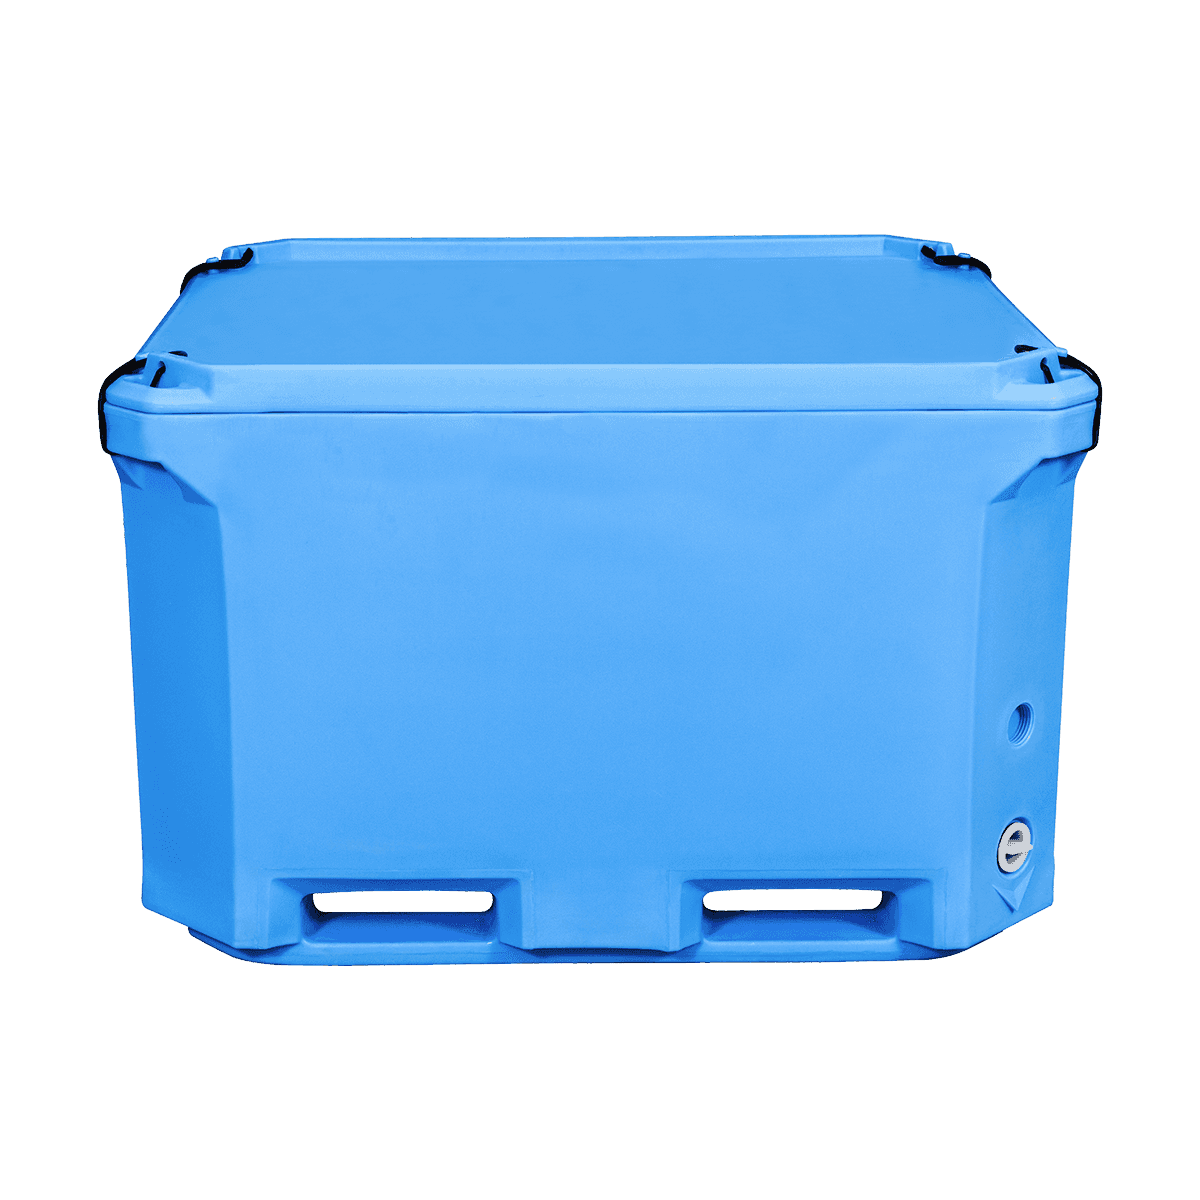 AF-660L Rotomolded Cooler Seafood Industrial Use Plastic Containers